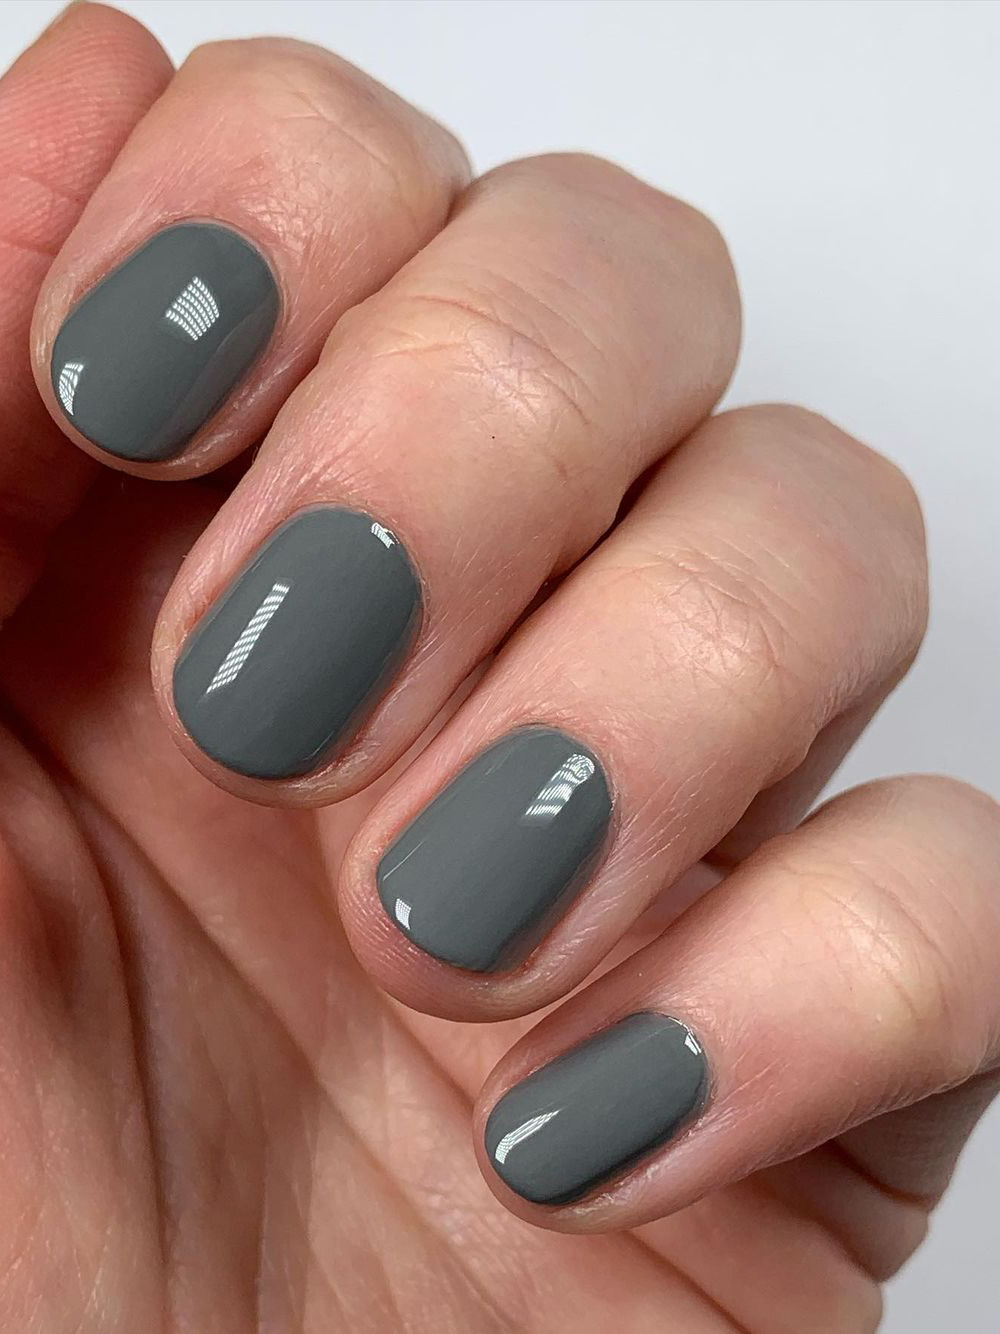 The 21 Best Dark Fall Nail Colors of 2021